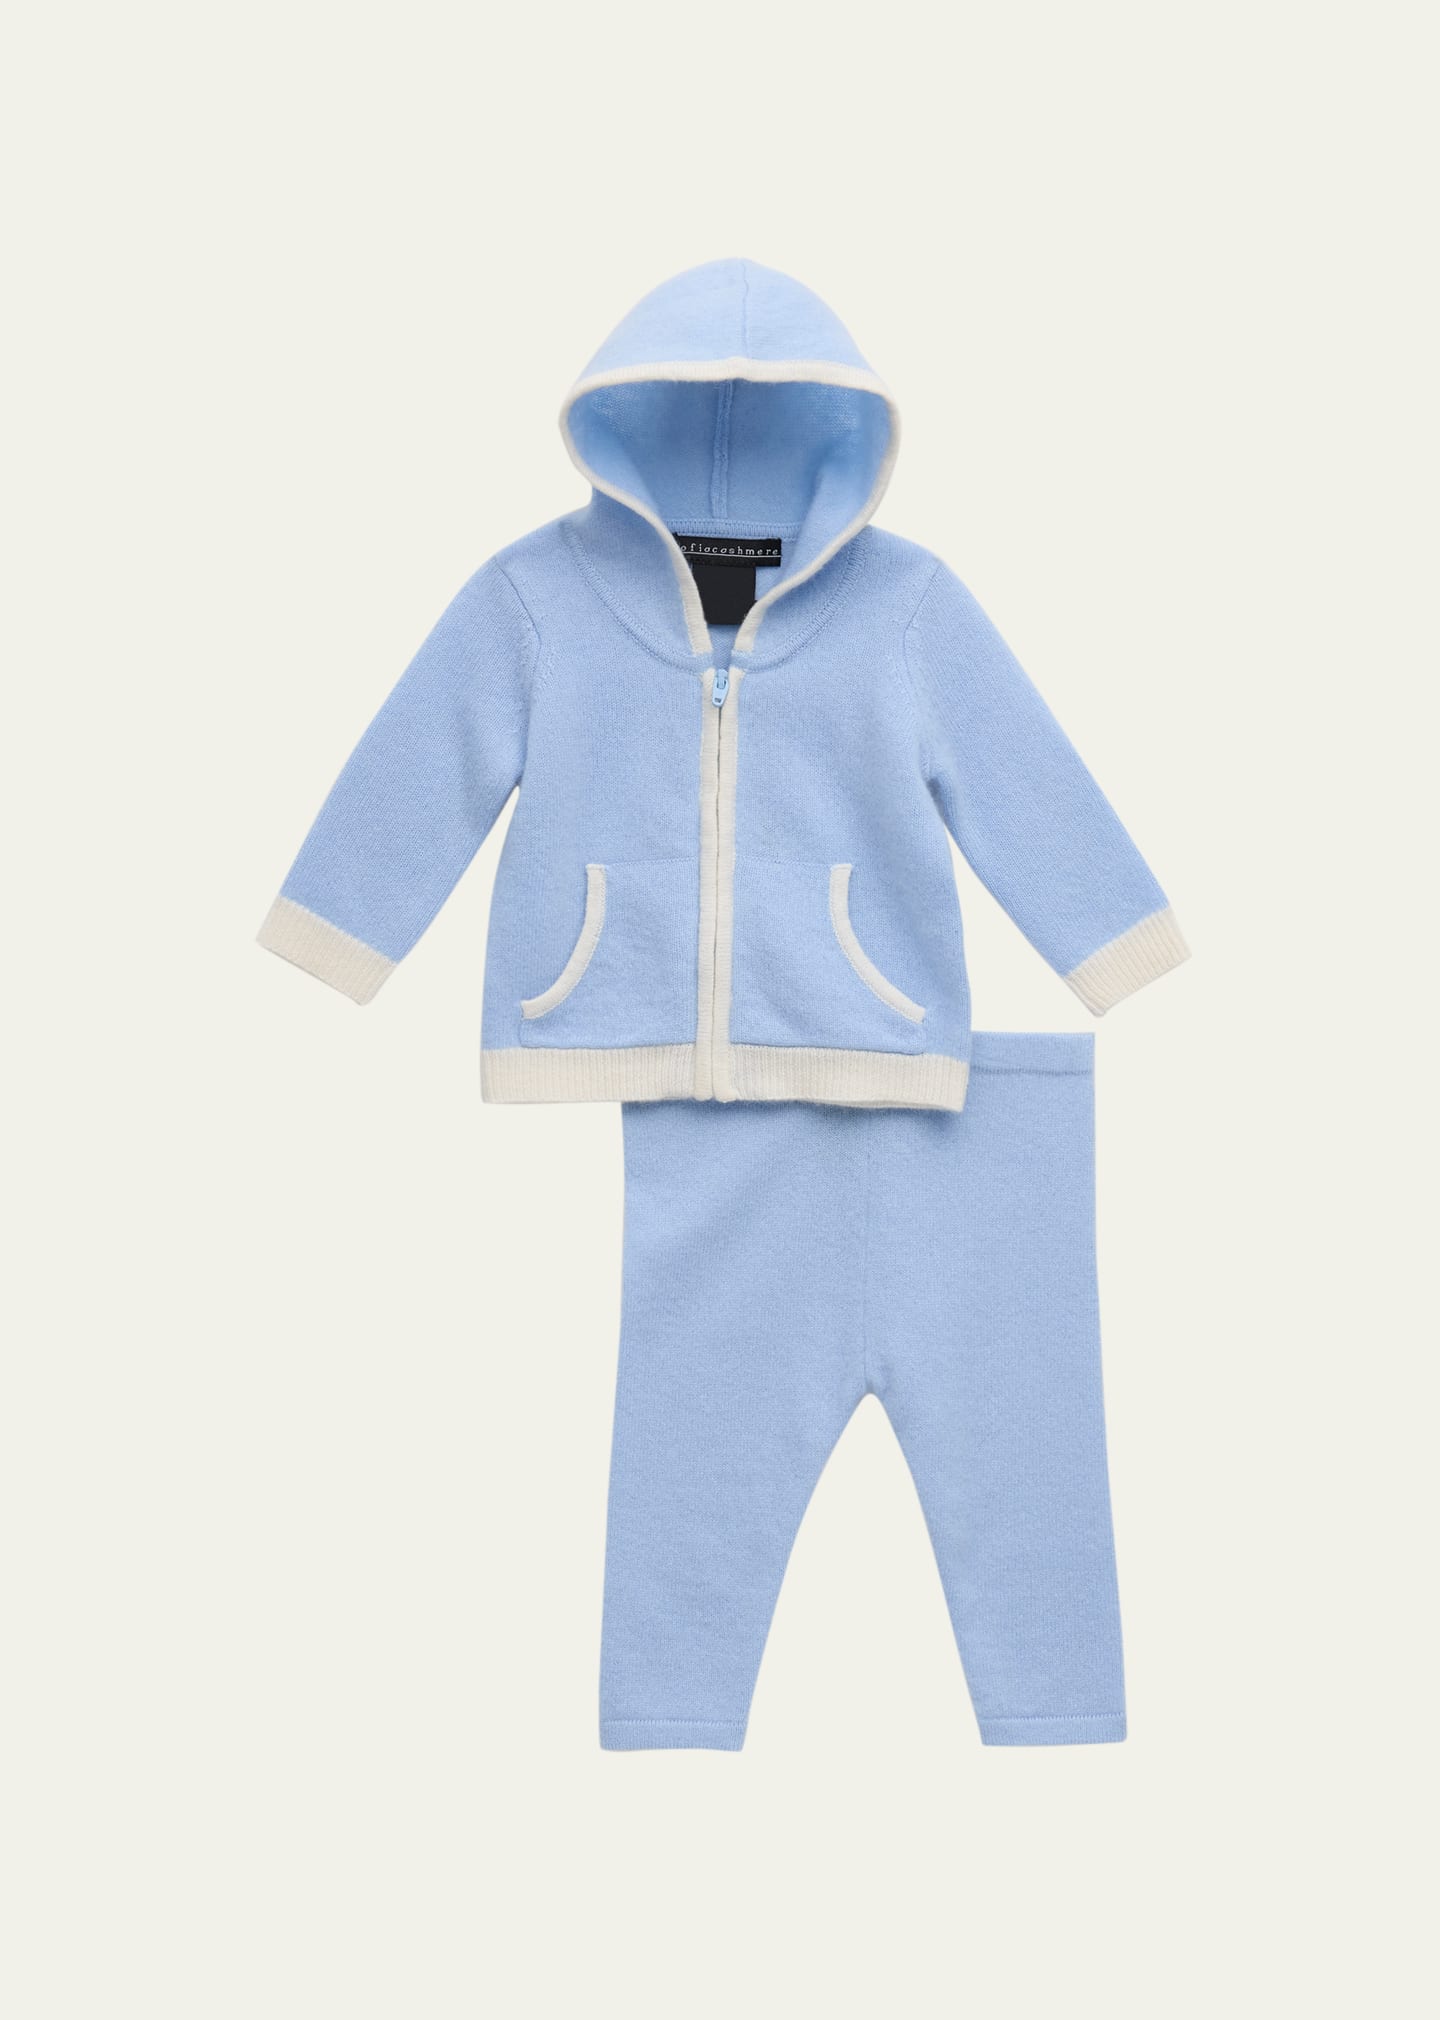 Shop Sofia Cashmere Kid's Cashmere Hoodie And Legging Set In Blue